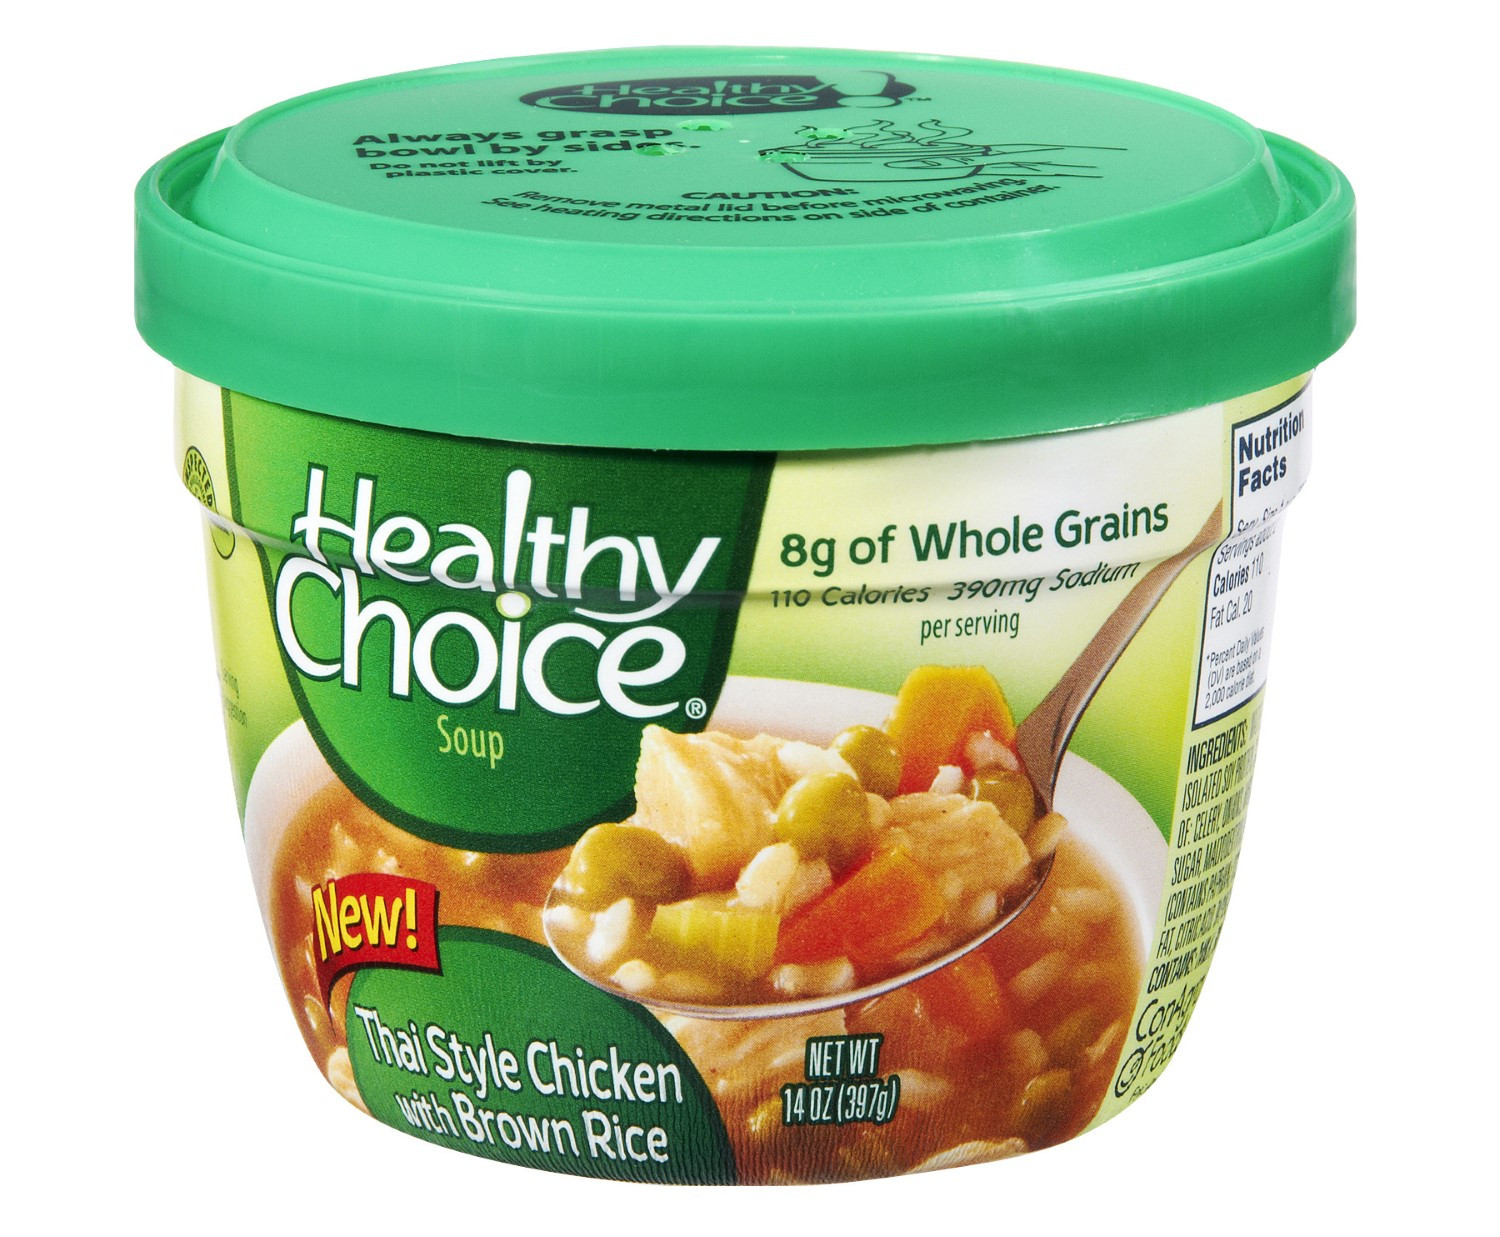 Healthy Choice Chicken Noodle Soup
 Healthy Choice Soup Microwave Bowl Thai Style Chicken